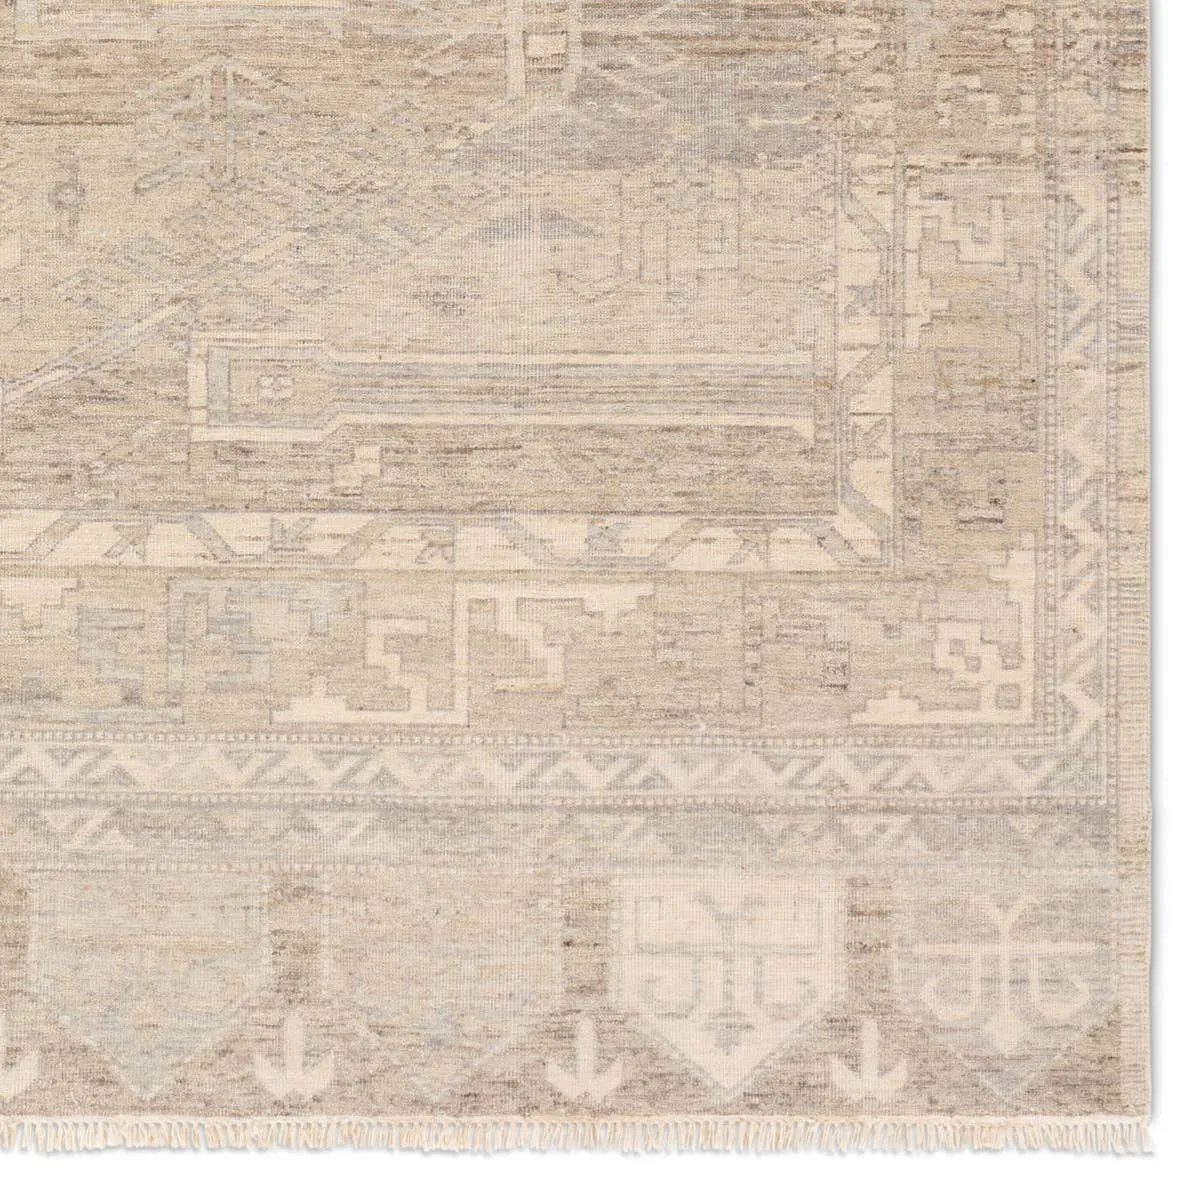 Whimsical colorways combine with the opulent detail of a traditional-inspired Kars pattern-- the Someplace in Time Keon represents nostalgia and progression, heritage and the contemporary. The Keon rug's cool gray, and ivory details ground spaces with luxe appeal and an exceptional hand-knotted quality. Amethyst Home provides interior design, new home construction design consulting, vintage area rugs, and lighting in the Seattle metro area.